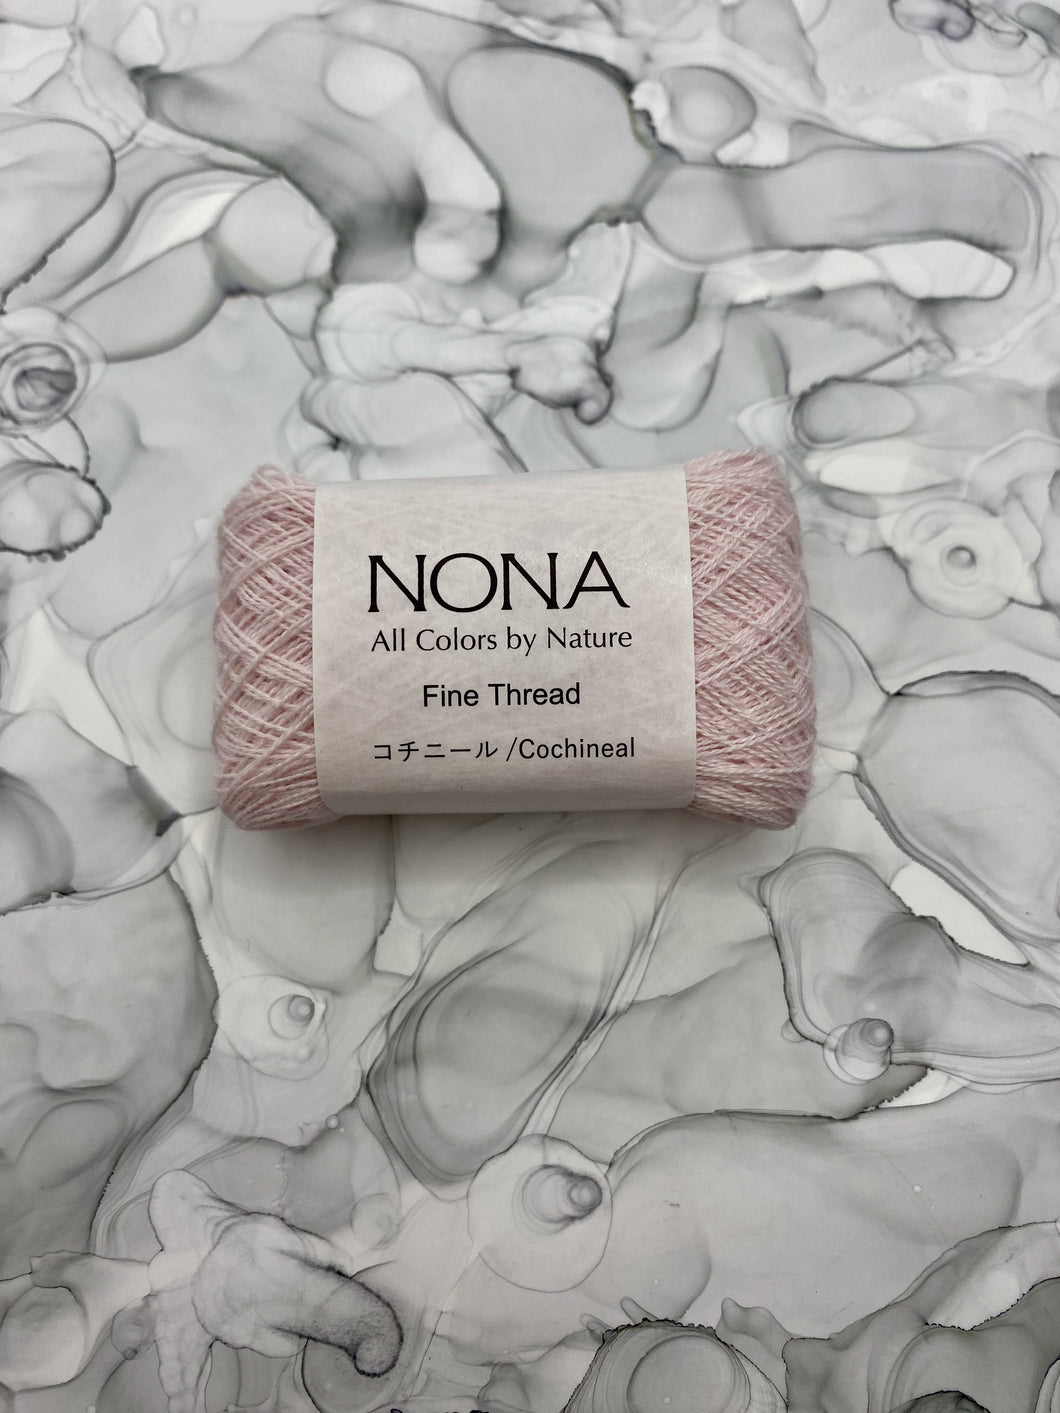 Nona Naturally Dyed Thread - Pinks and Purples